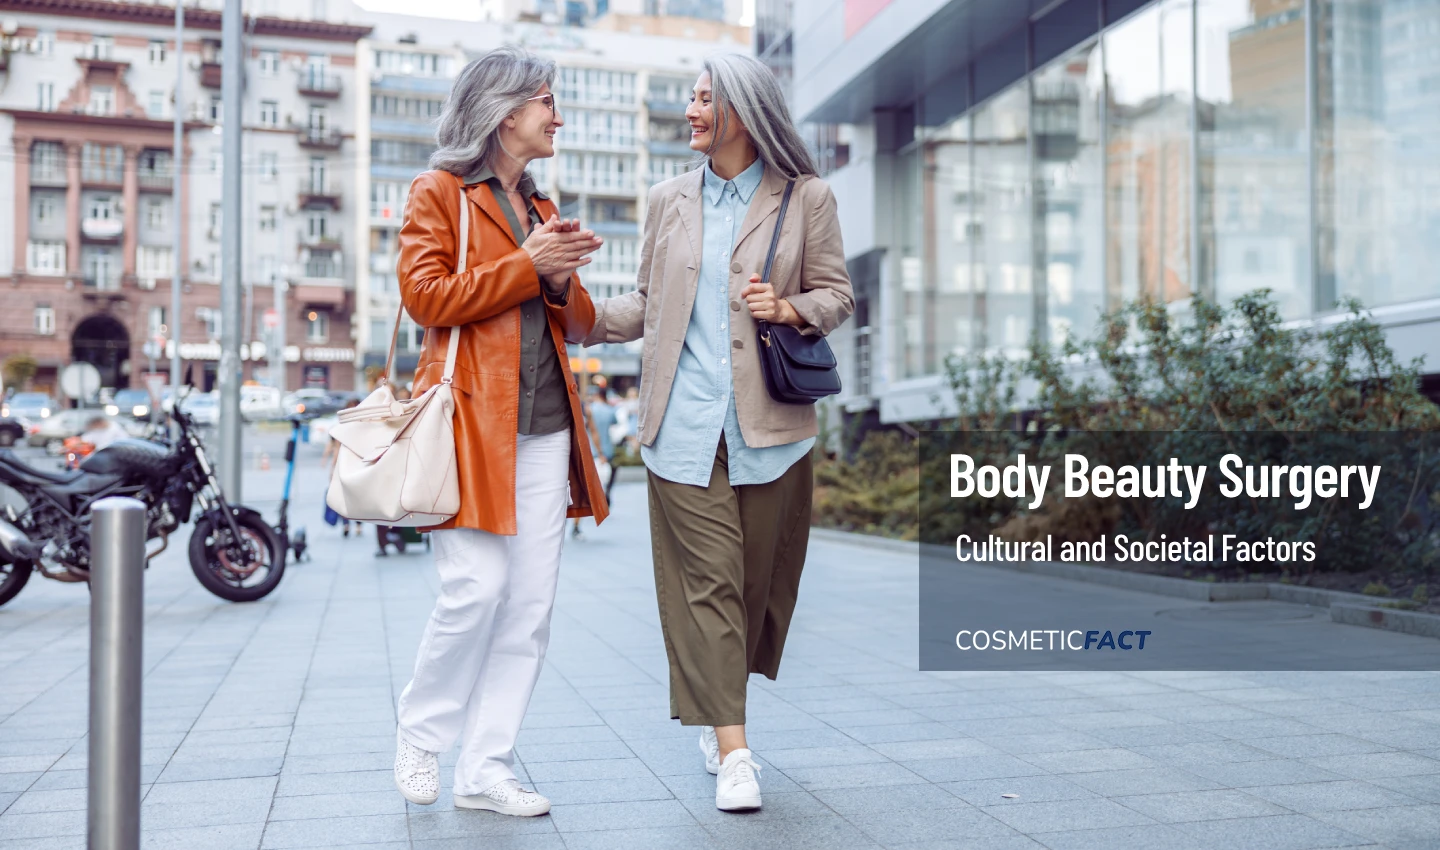 Two middle-aged women smile and talk on a street corner, representing the importance of navigating societal pressures and beauty standards related to body surgery.